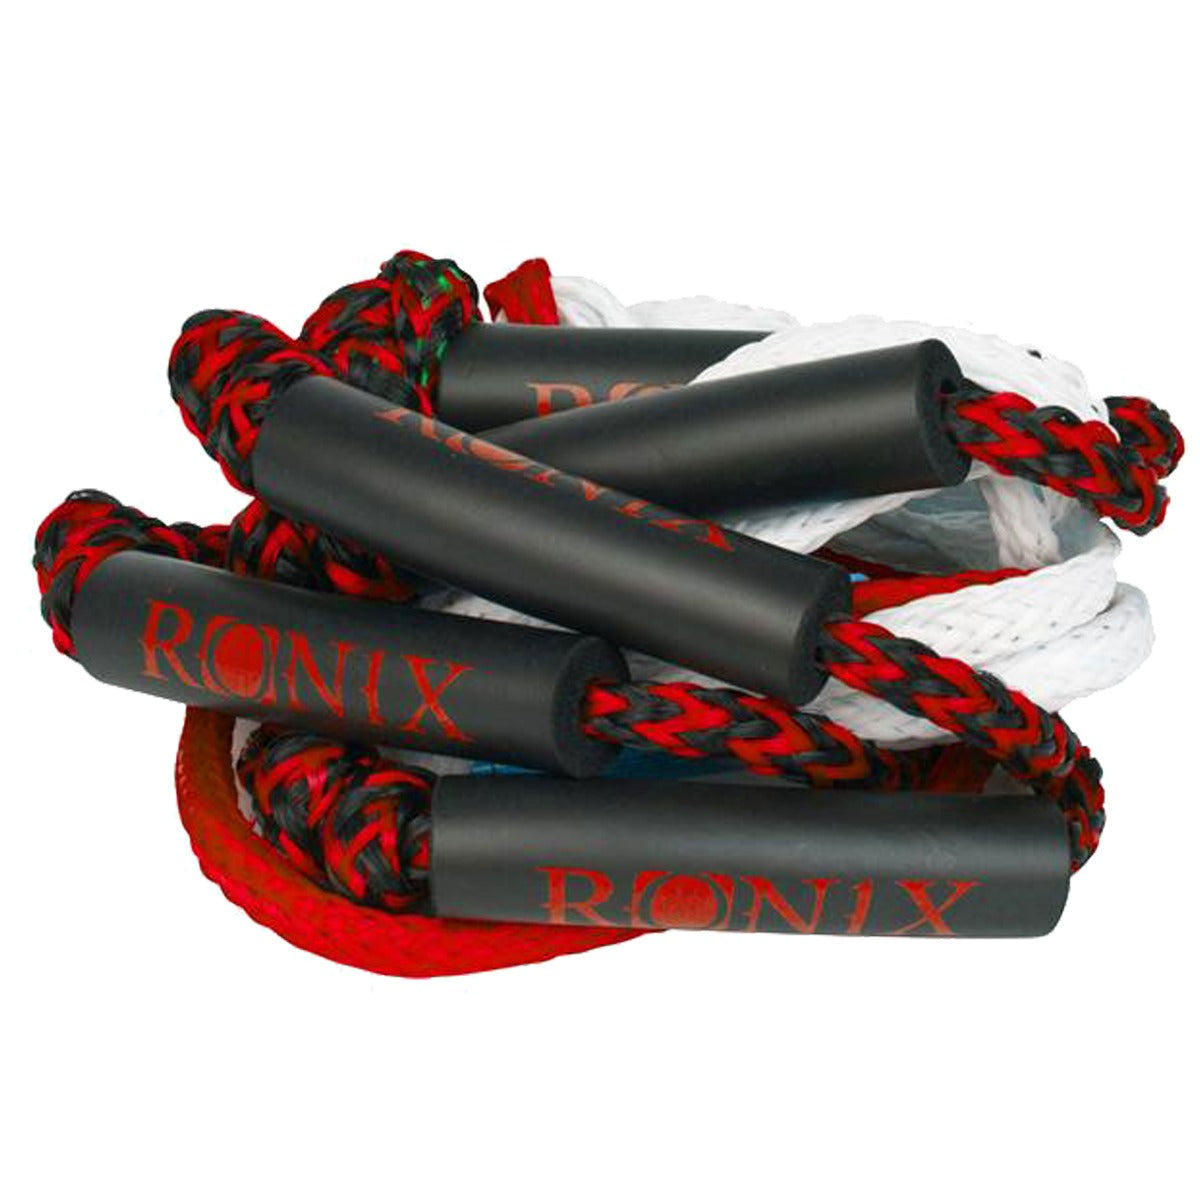 A pile of Ronix Surf Ropes with the word Ronix on them.